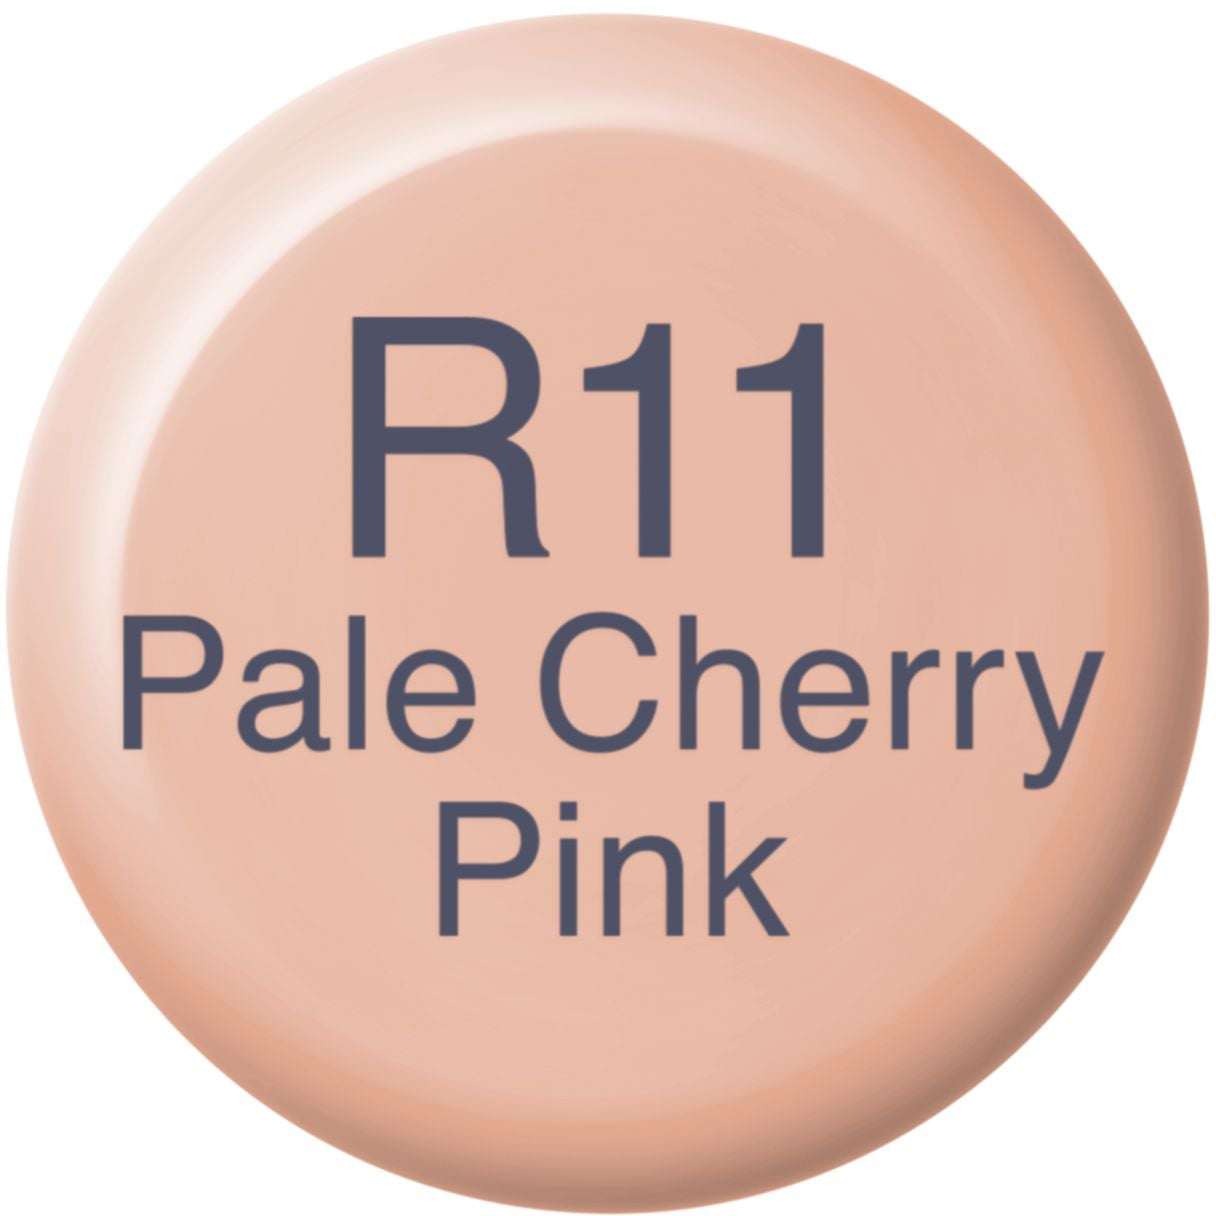 COPIC Ink Refill 21076185 R11 - Pale Cherry Pink R11 - Pale Cherry Pink